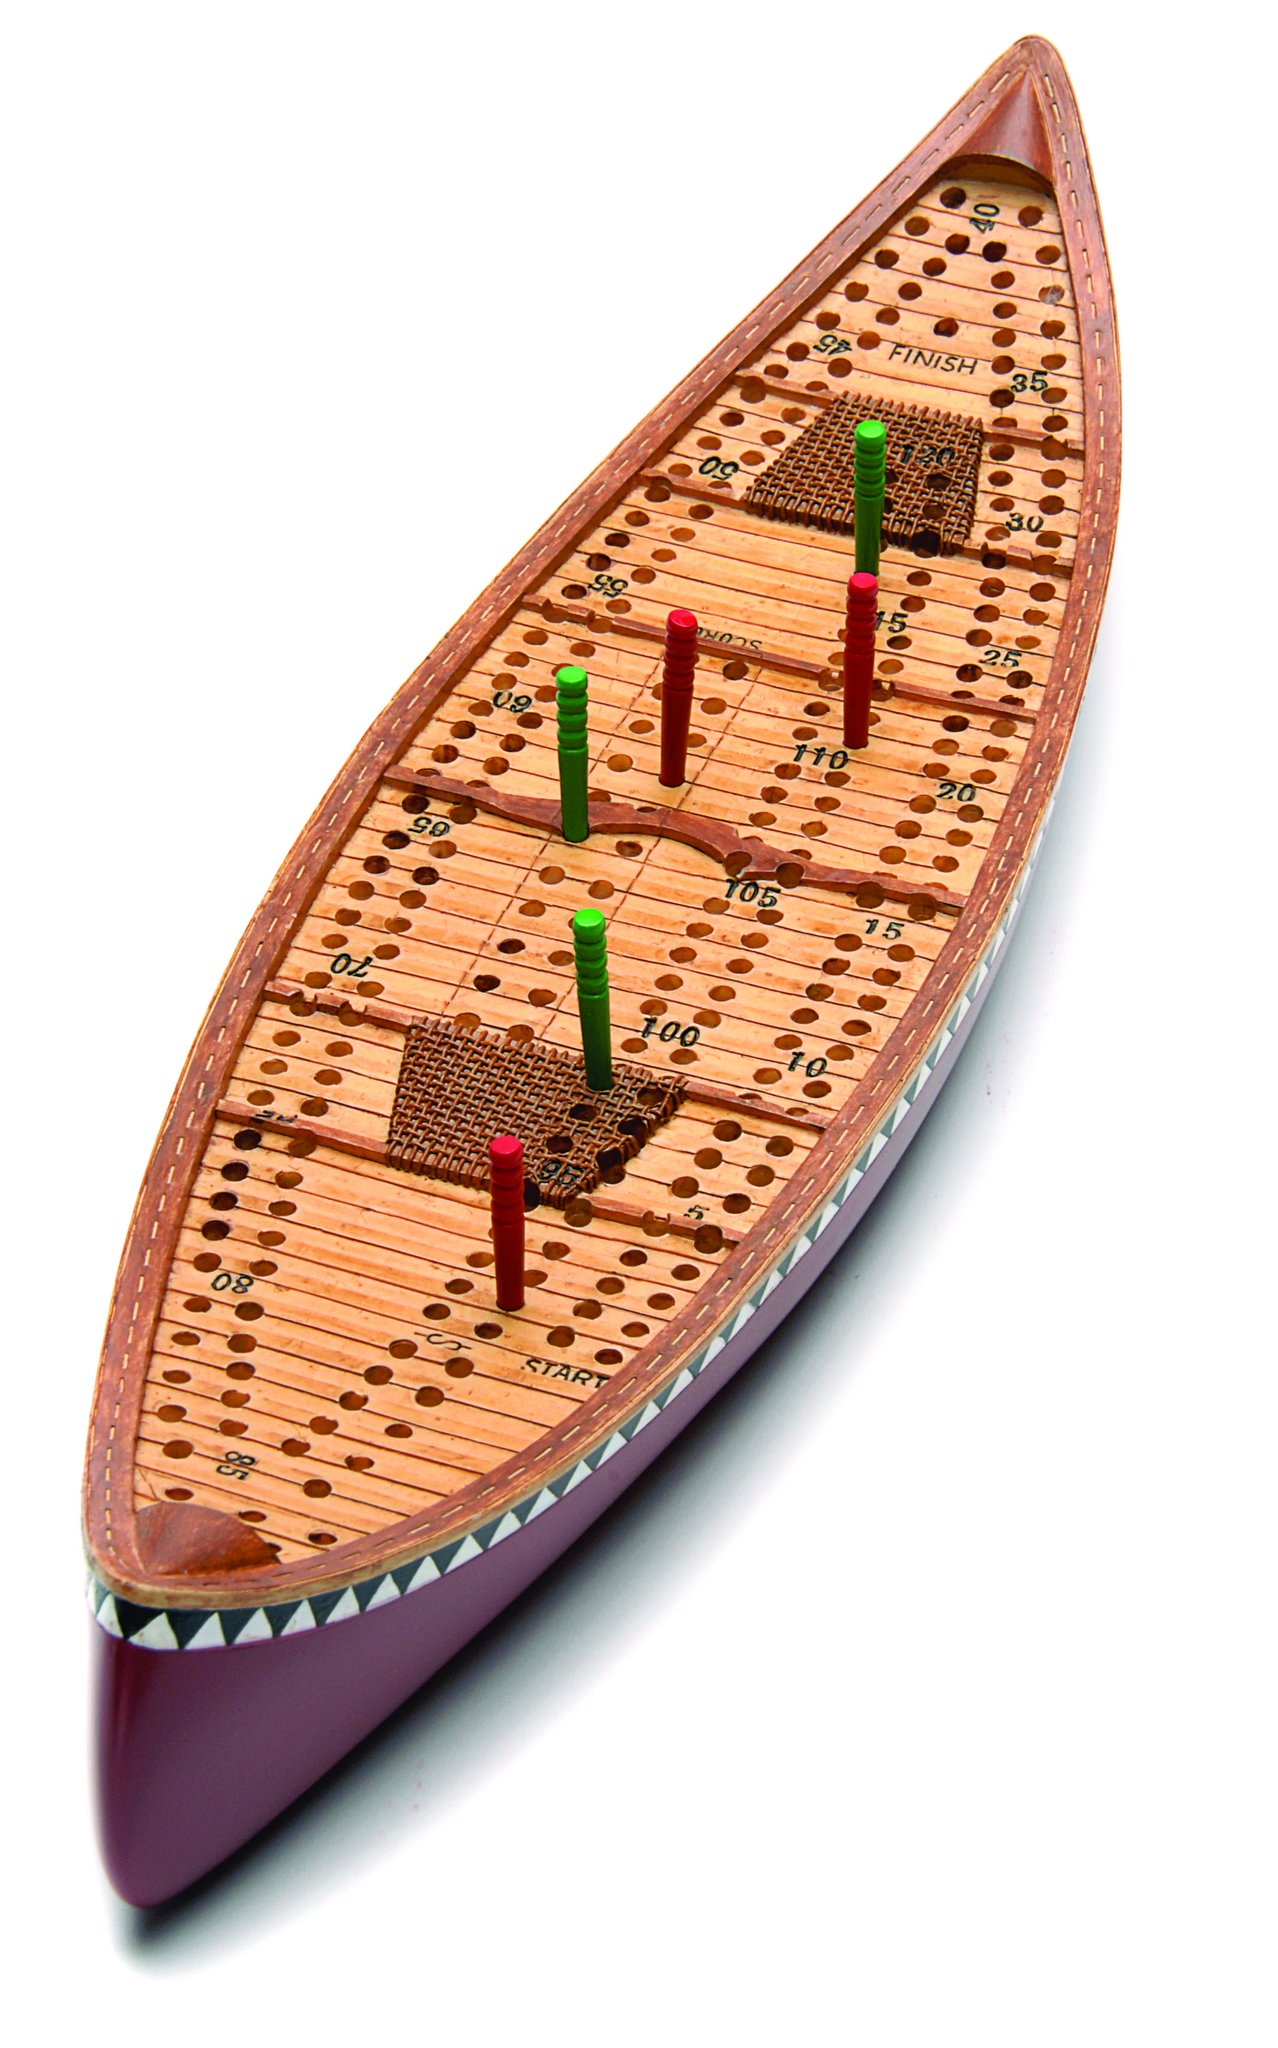 Cribbage board table